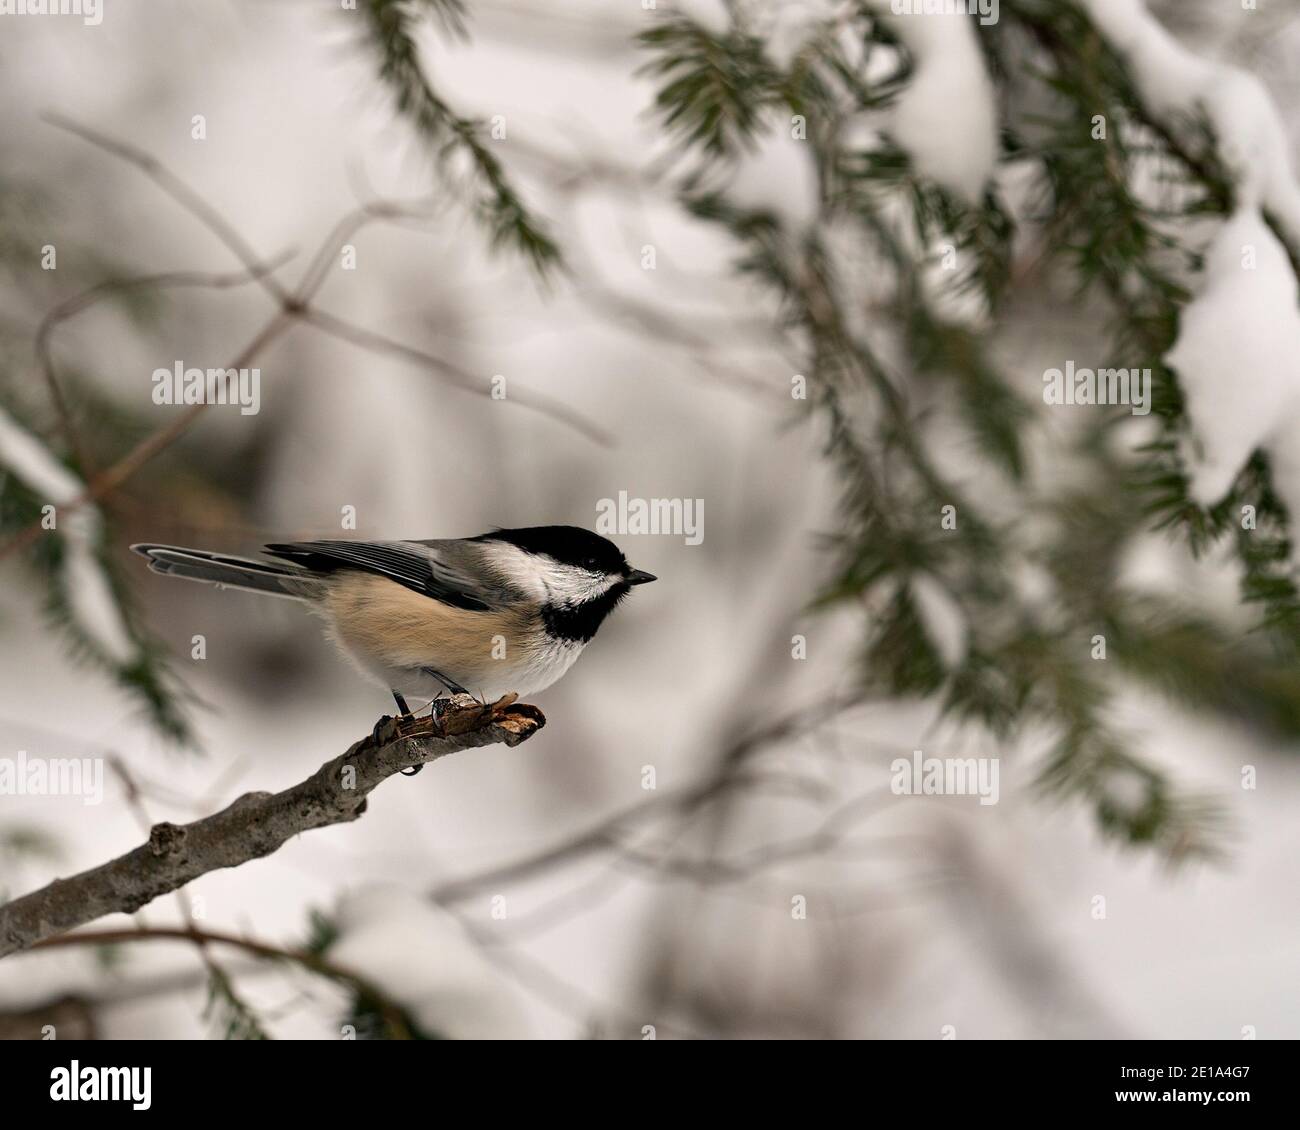 Chickadee perched on a branch with a blur background in its habitat and environment displaying feather plumage, body, head, eye, beak, plumage. Image. Stock Photo